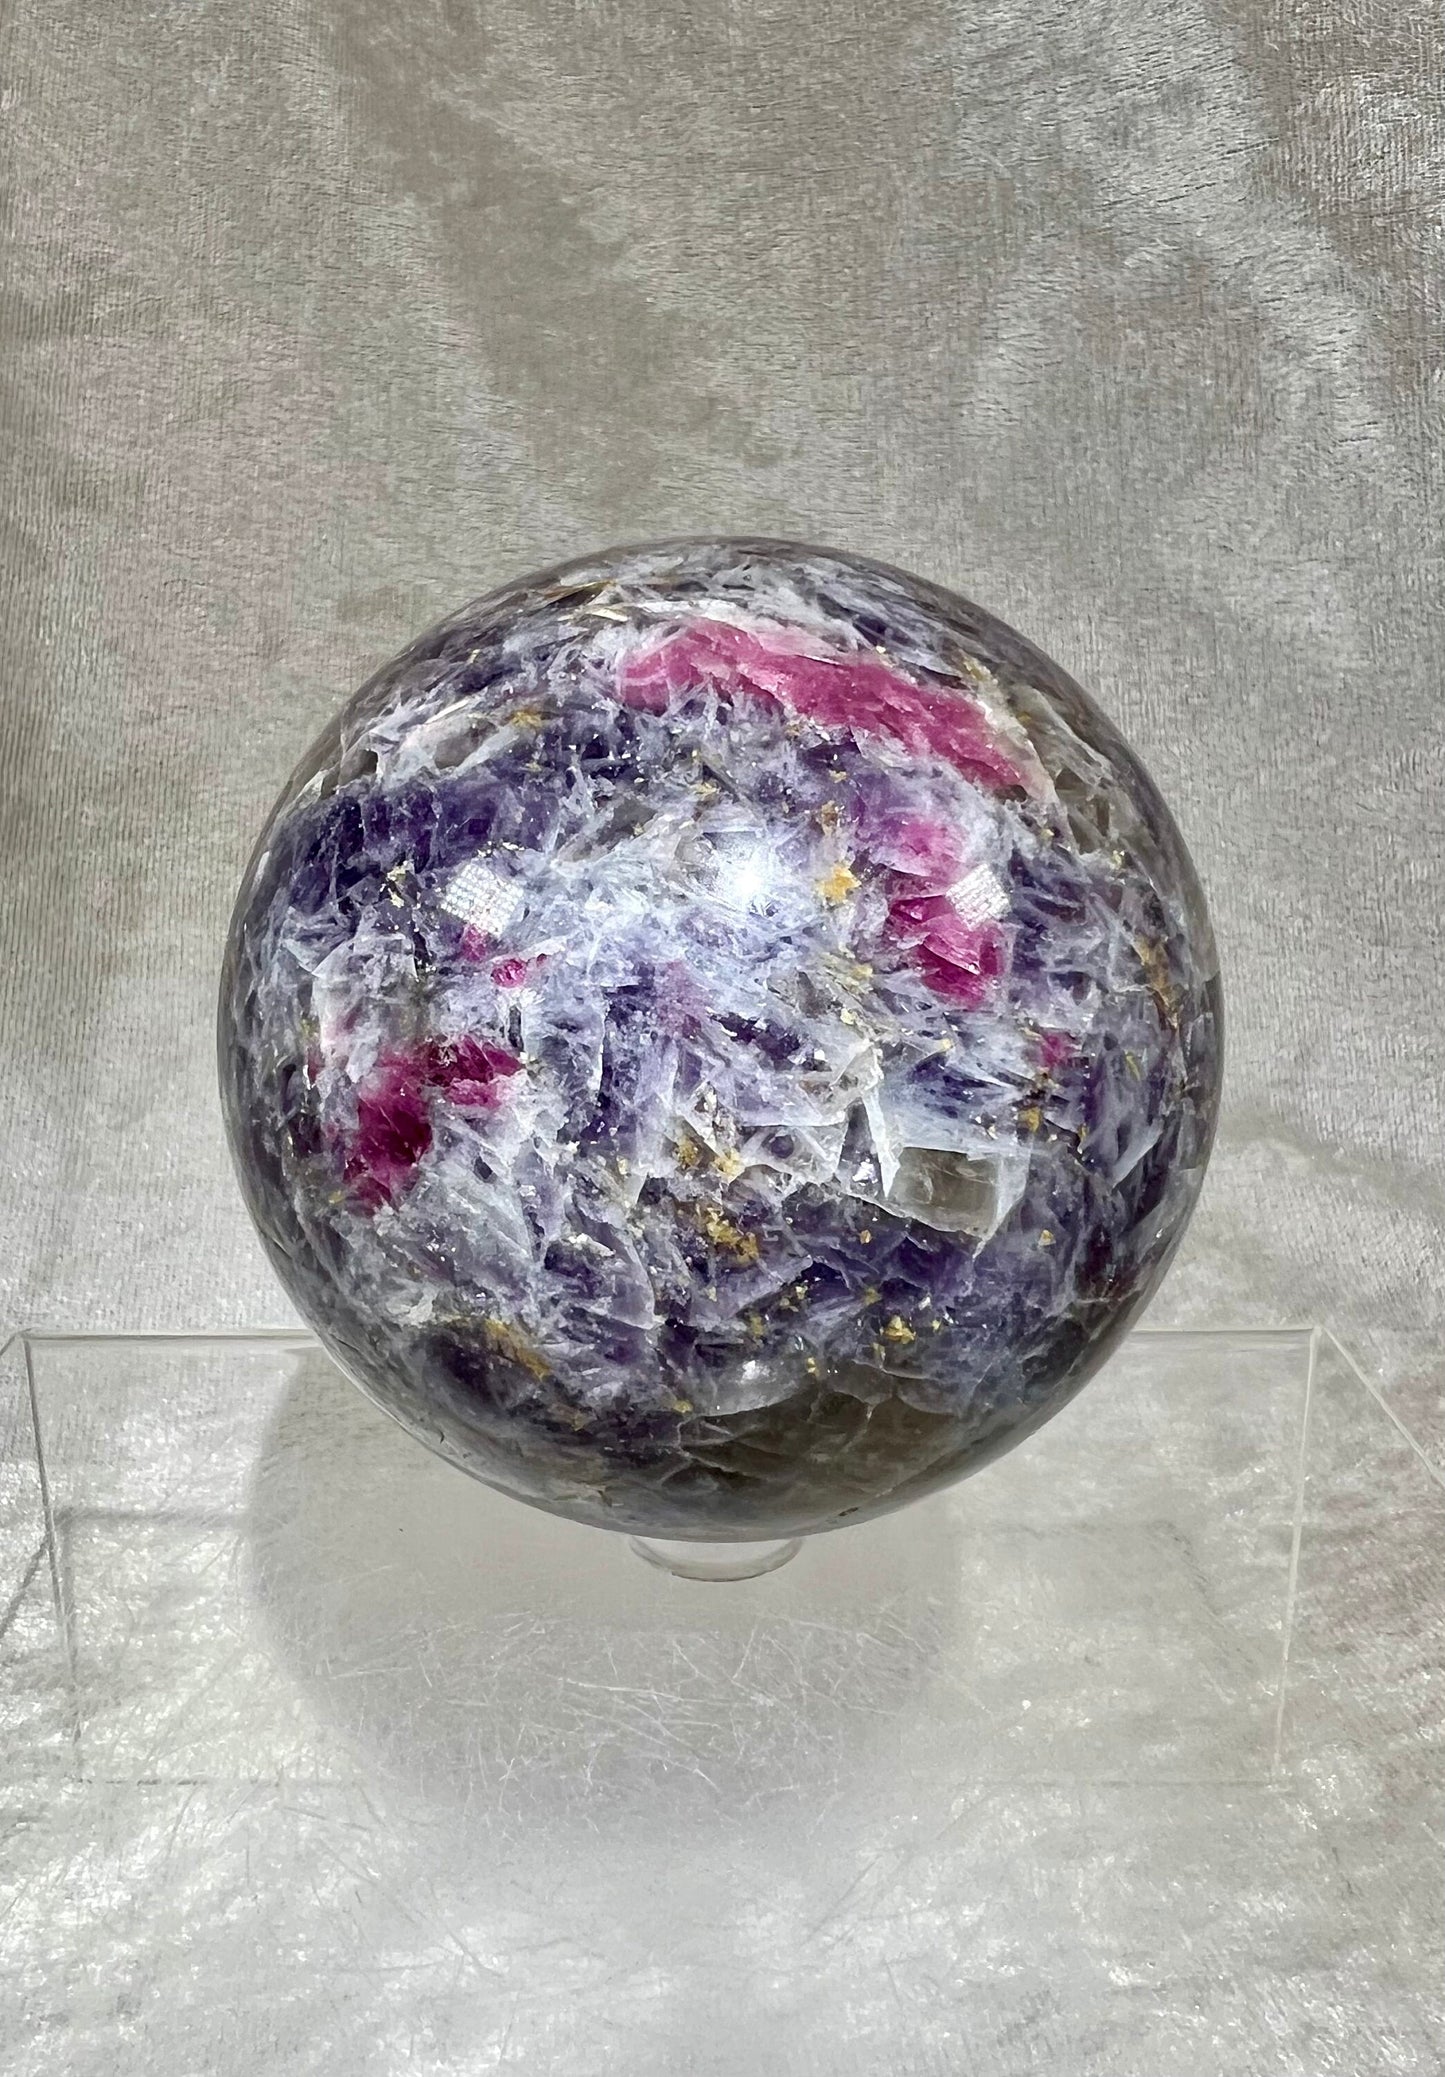 Rare Large Unicorn Crystal Sphere. 81mm. Stunning Colors With Lots Of Flash! All Natural Unicorn Crystal.